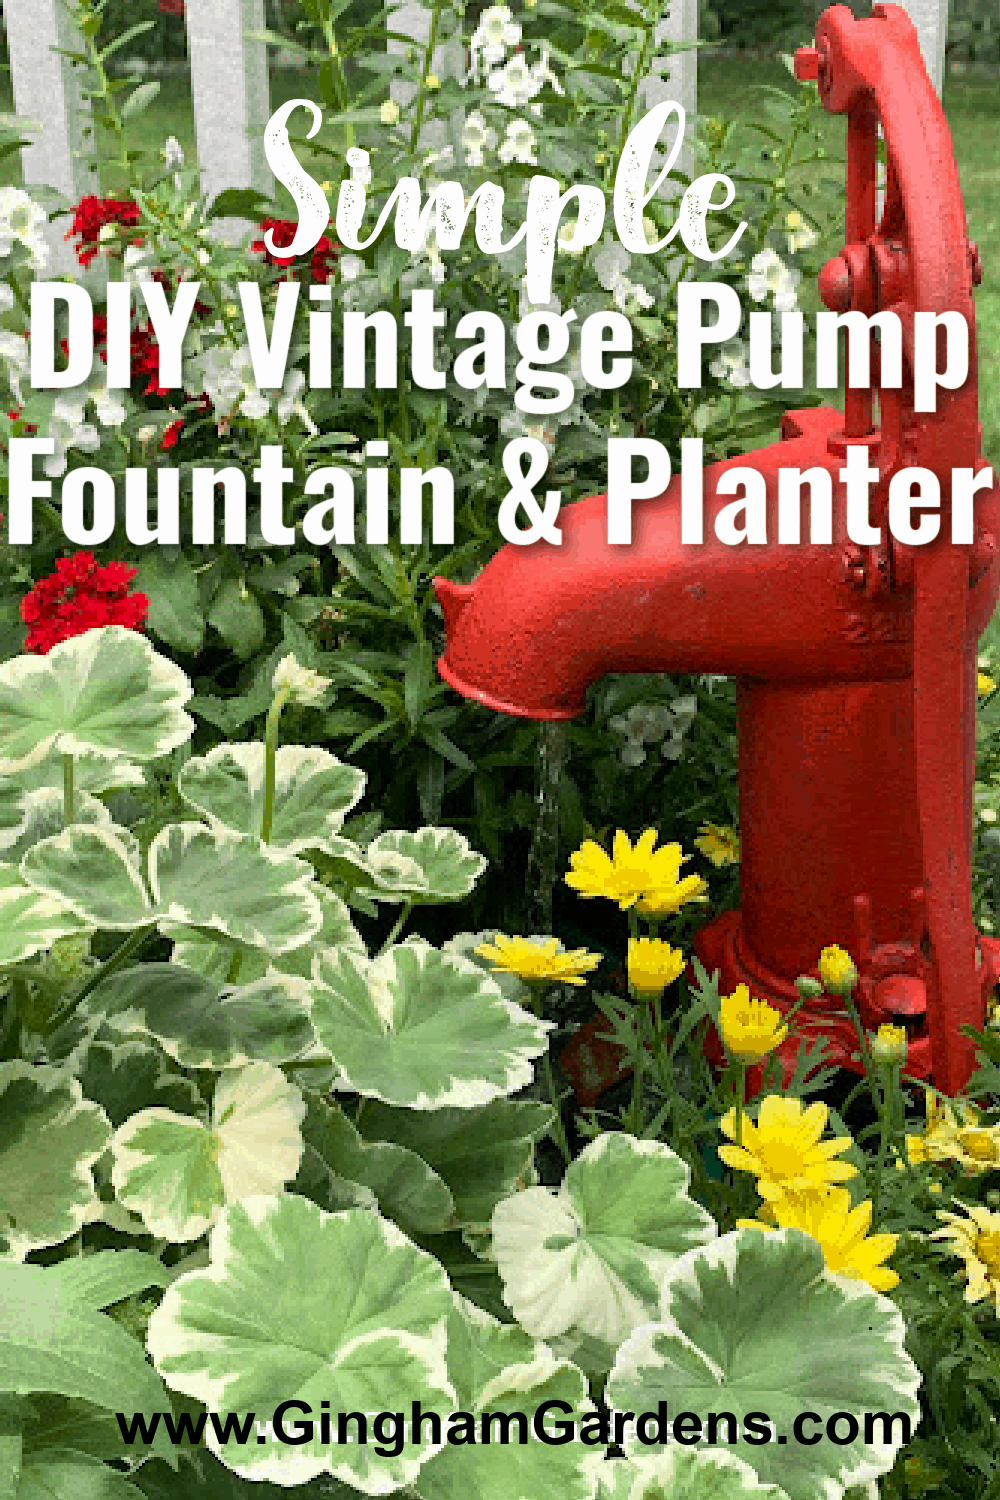 Image of a red vintage water pump in a planter with text overlay - DIY Vintage Pump Fountain & Planter